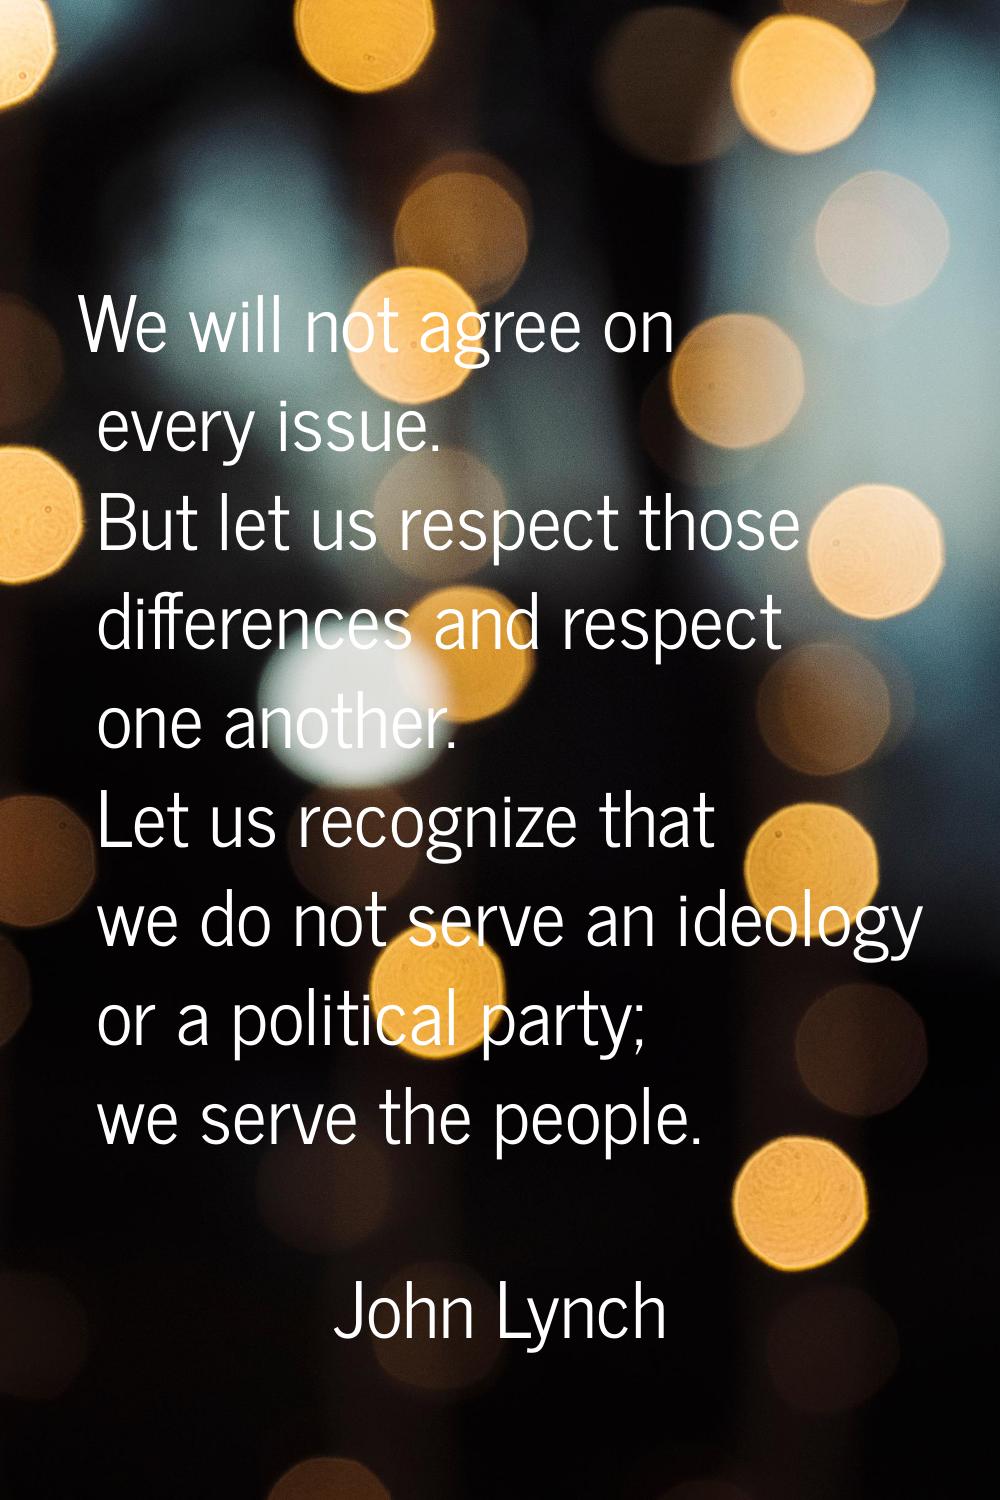 We will not agree on every issue. But let us respect those differences and respect one another. Let